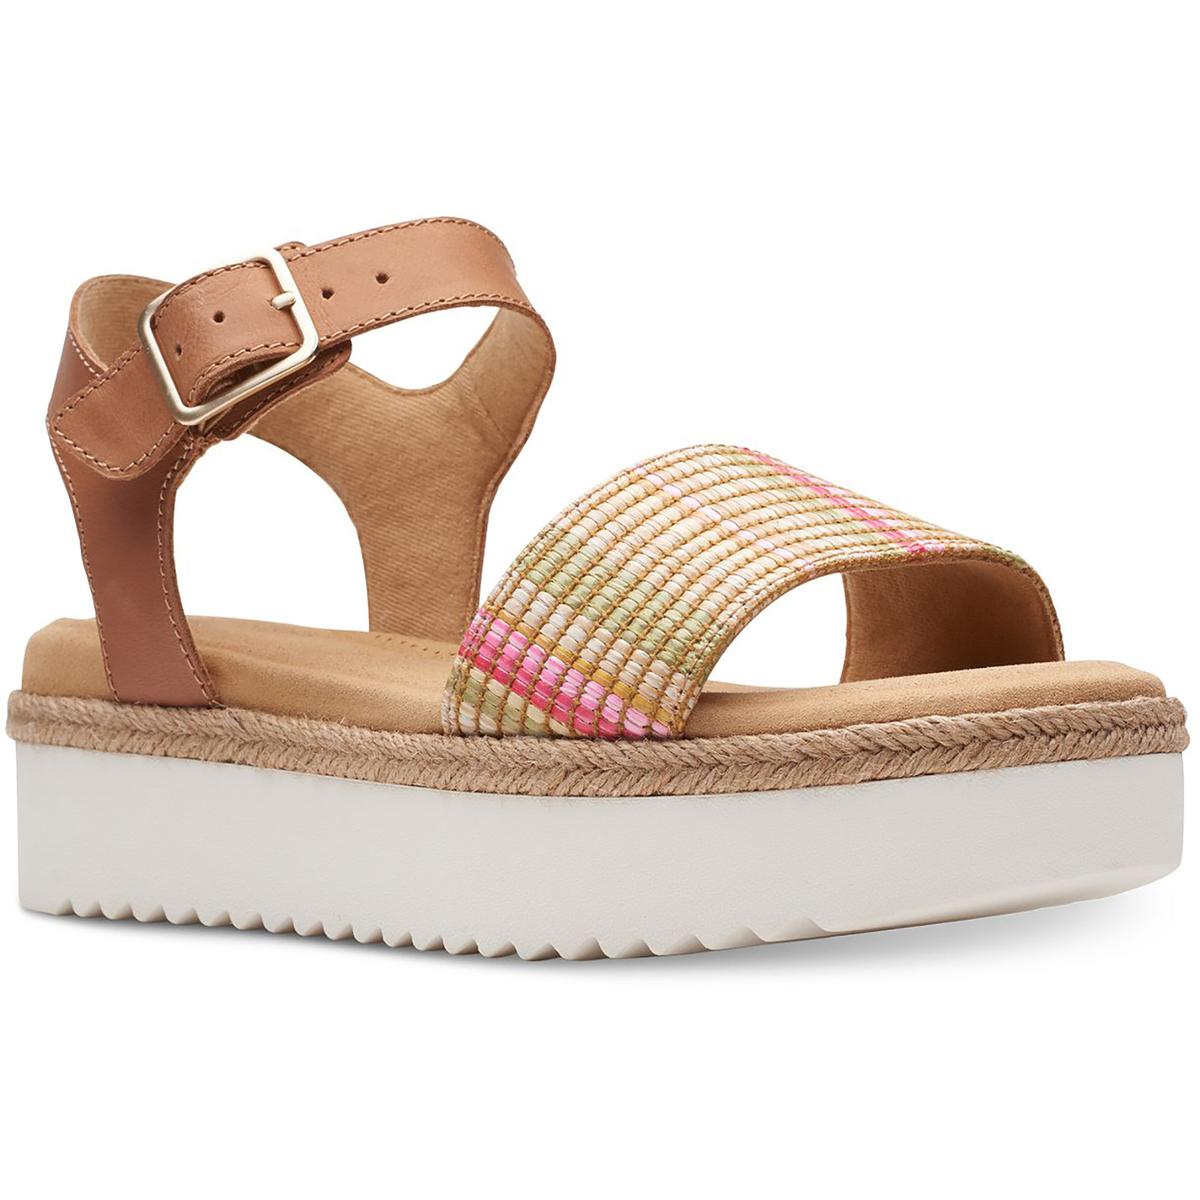 Clarks Lana Shore Womens Leather Wedge Sandals